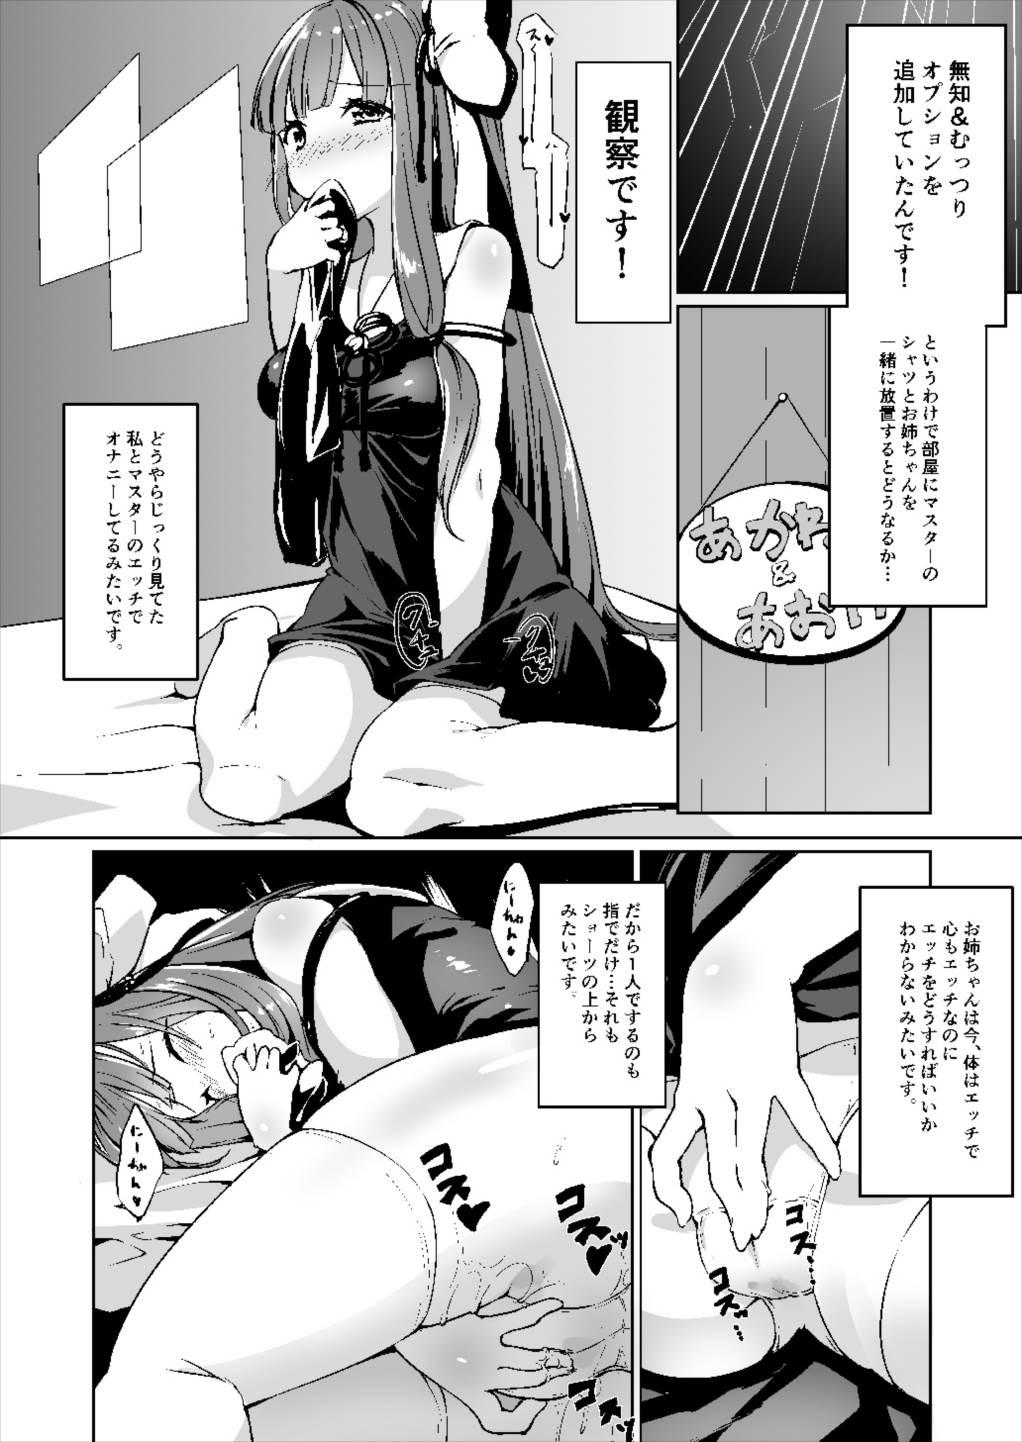 Satin コトノハラバーズ VOL.06 【お姉ちゃん観察日記】 - Vocaloid Voiceroid Glamcore - Page 8